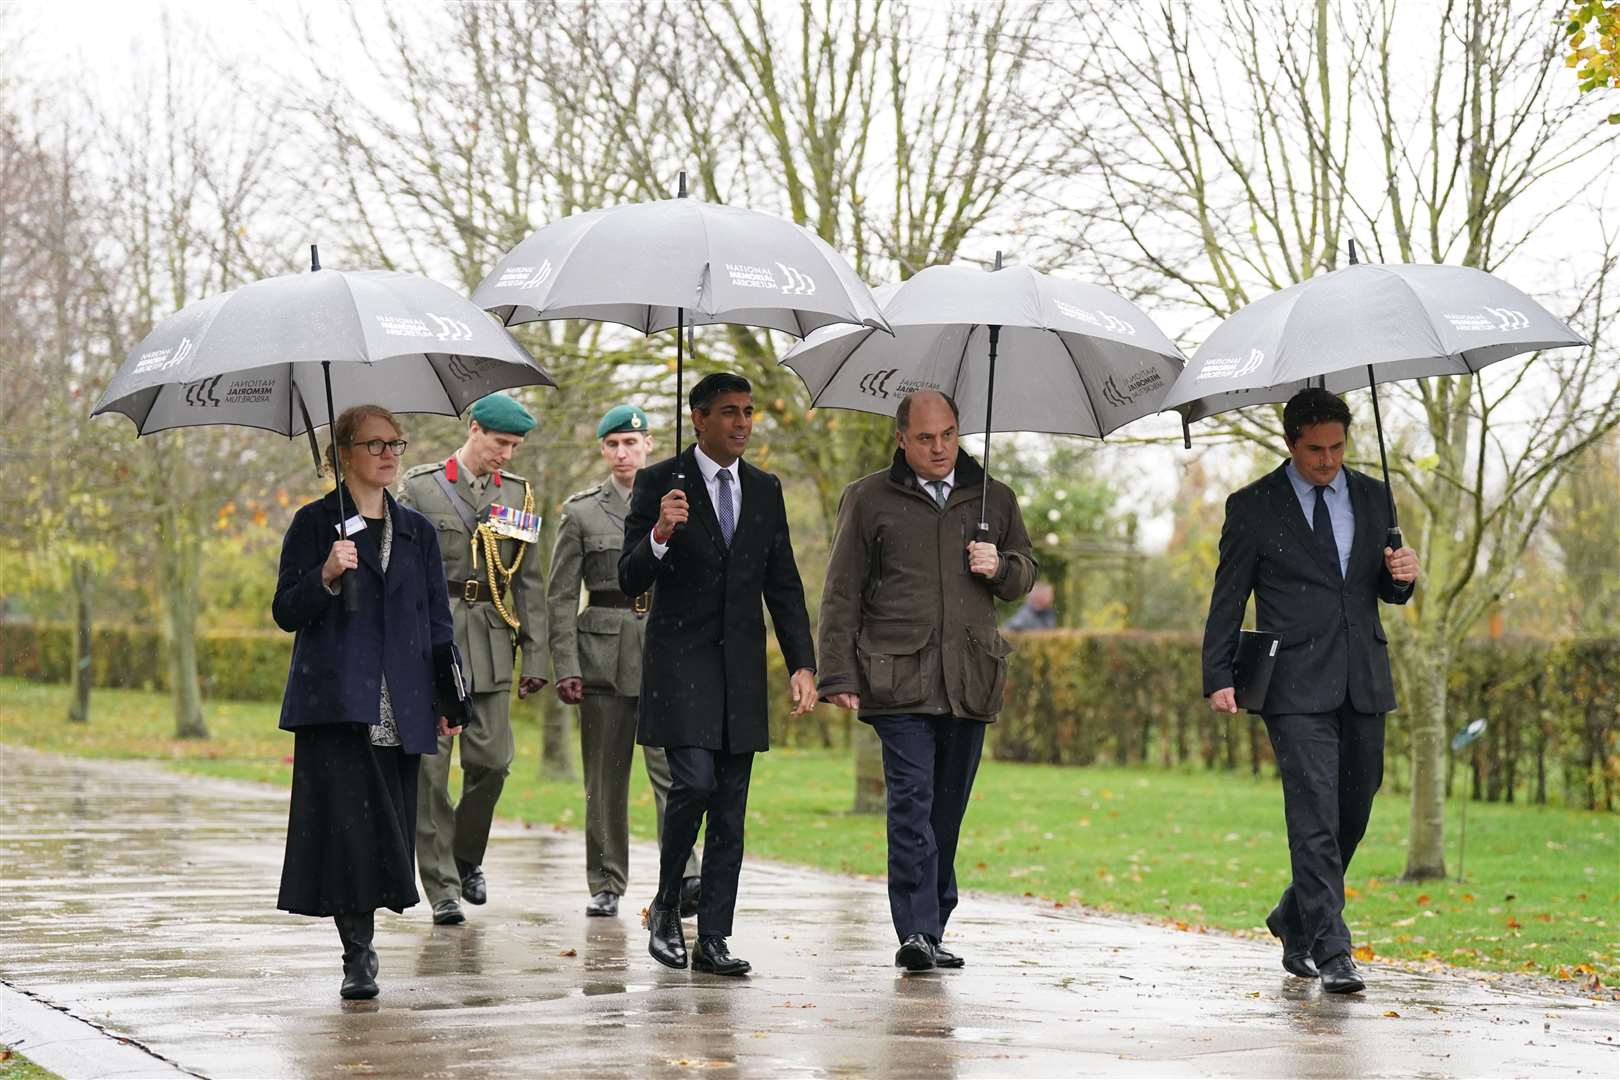 Prime Minister Rishi Sunak, Defence Secretary Ben Wallace, and Minister for Veterans’ Affairs, Johnny Mercer (right), at the National Memorial Arboretum (Joe Giddens/PA)